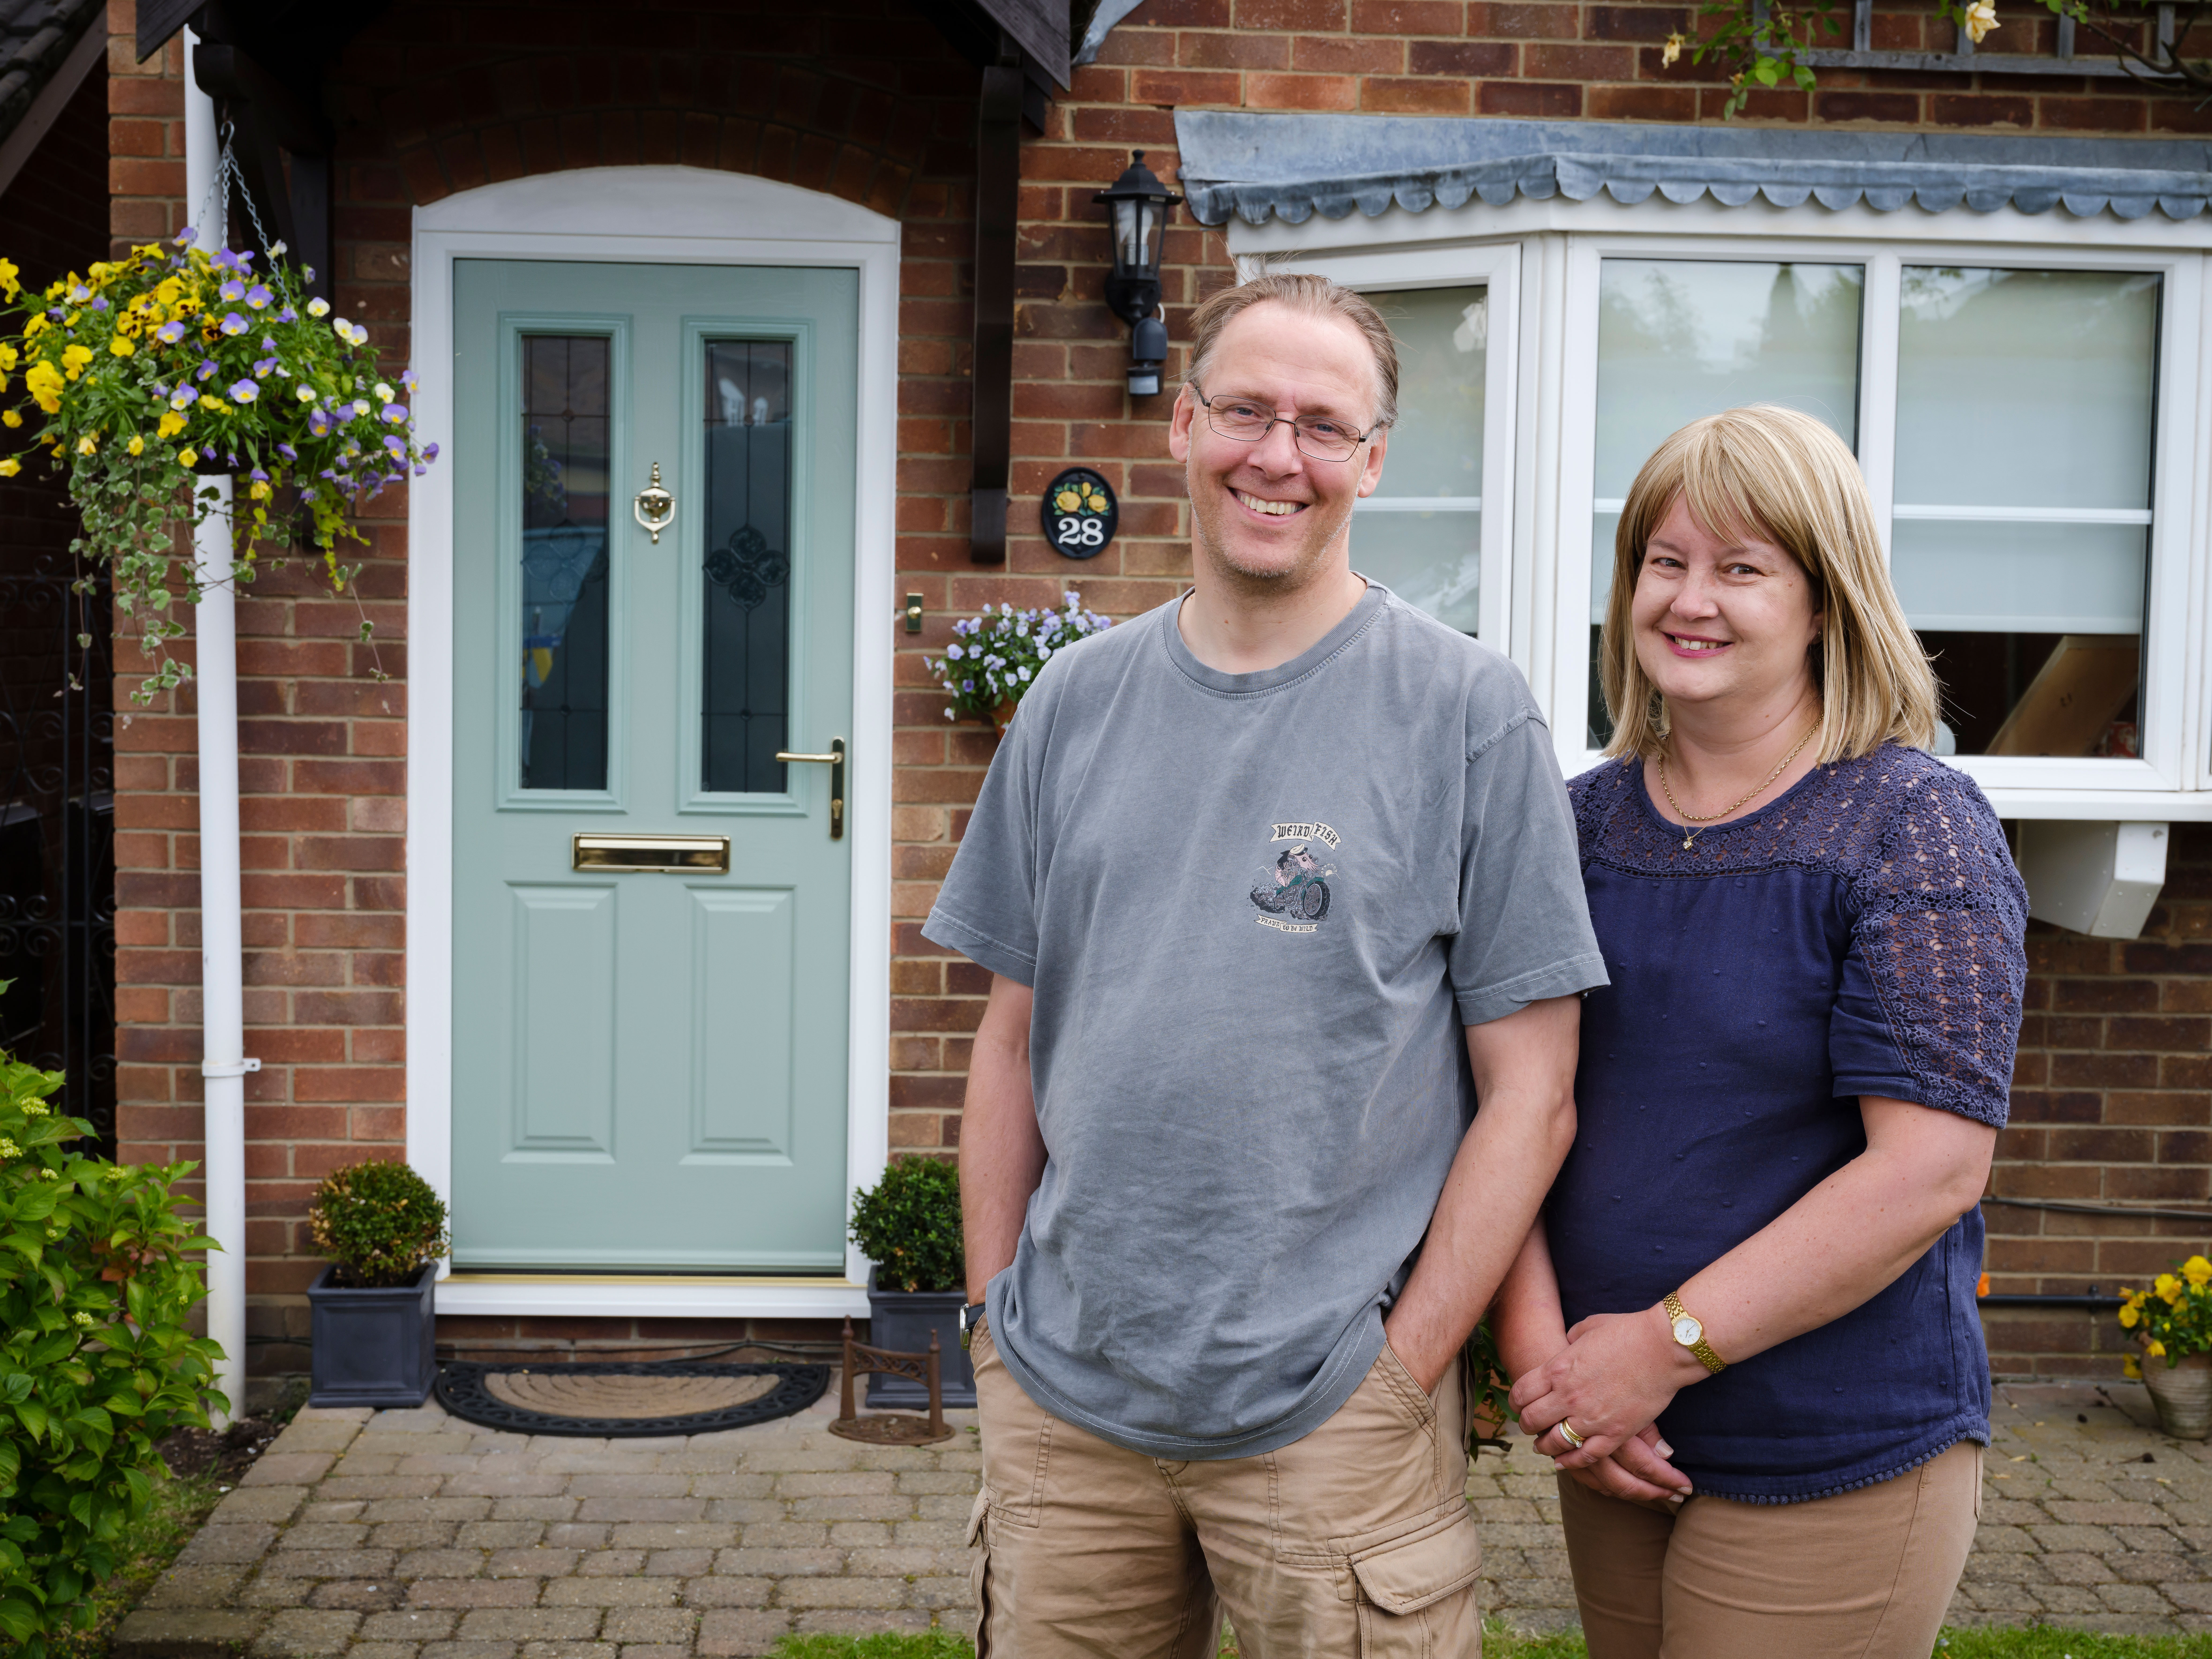 A happy customer Caroline satisfied with the work quality of Endurance doors